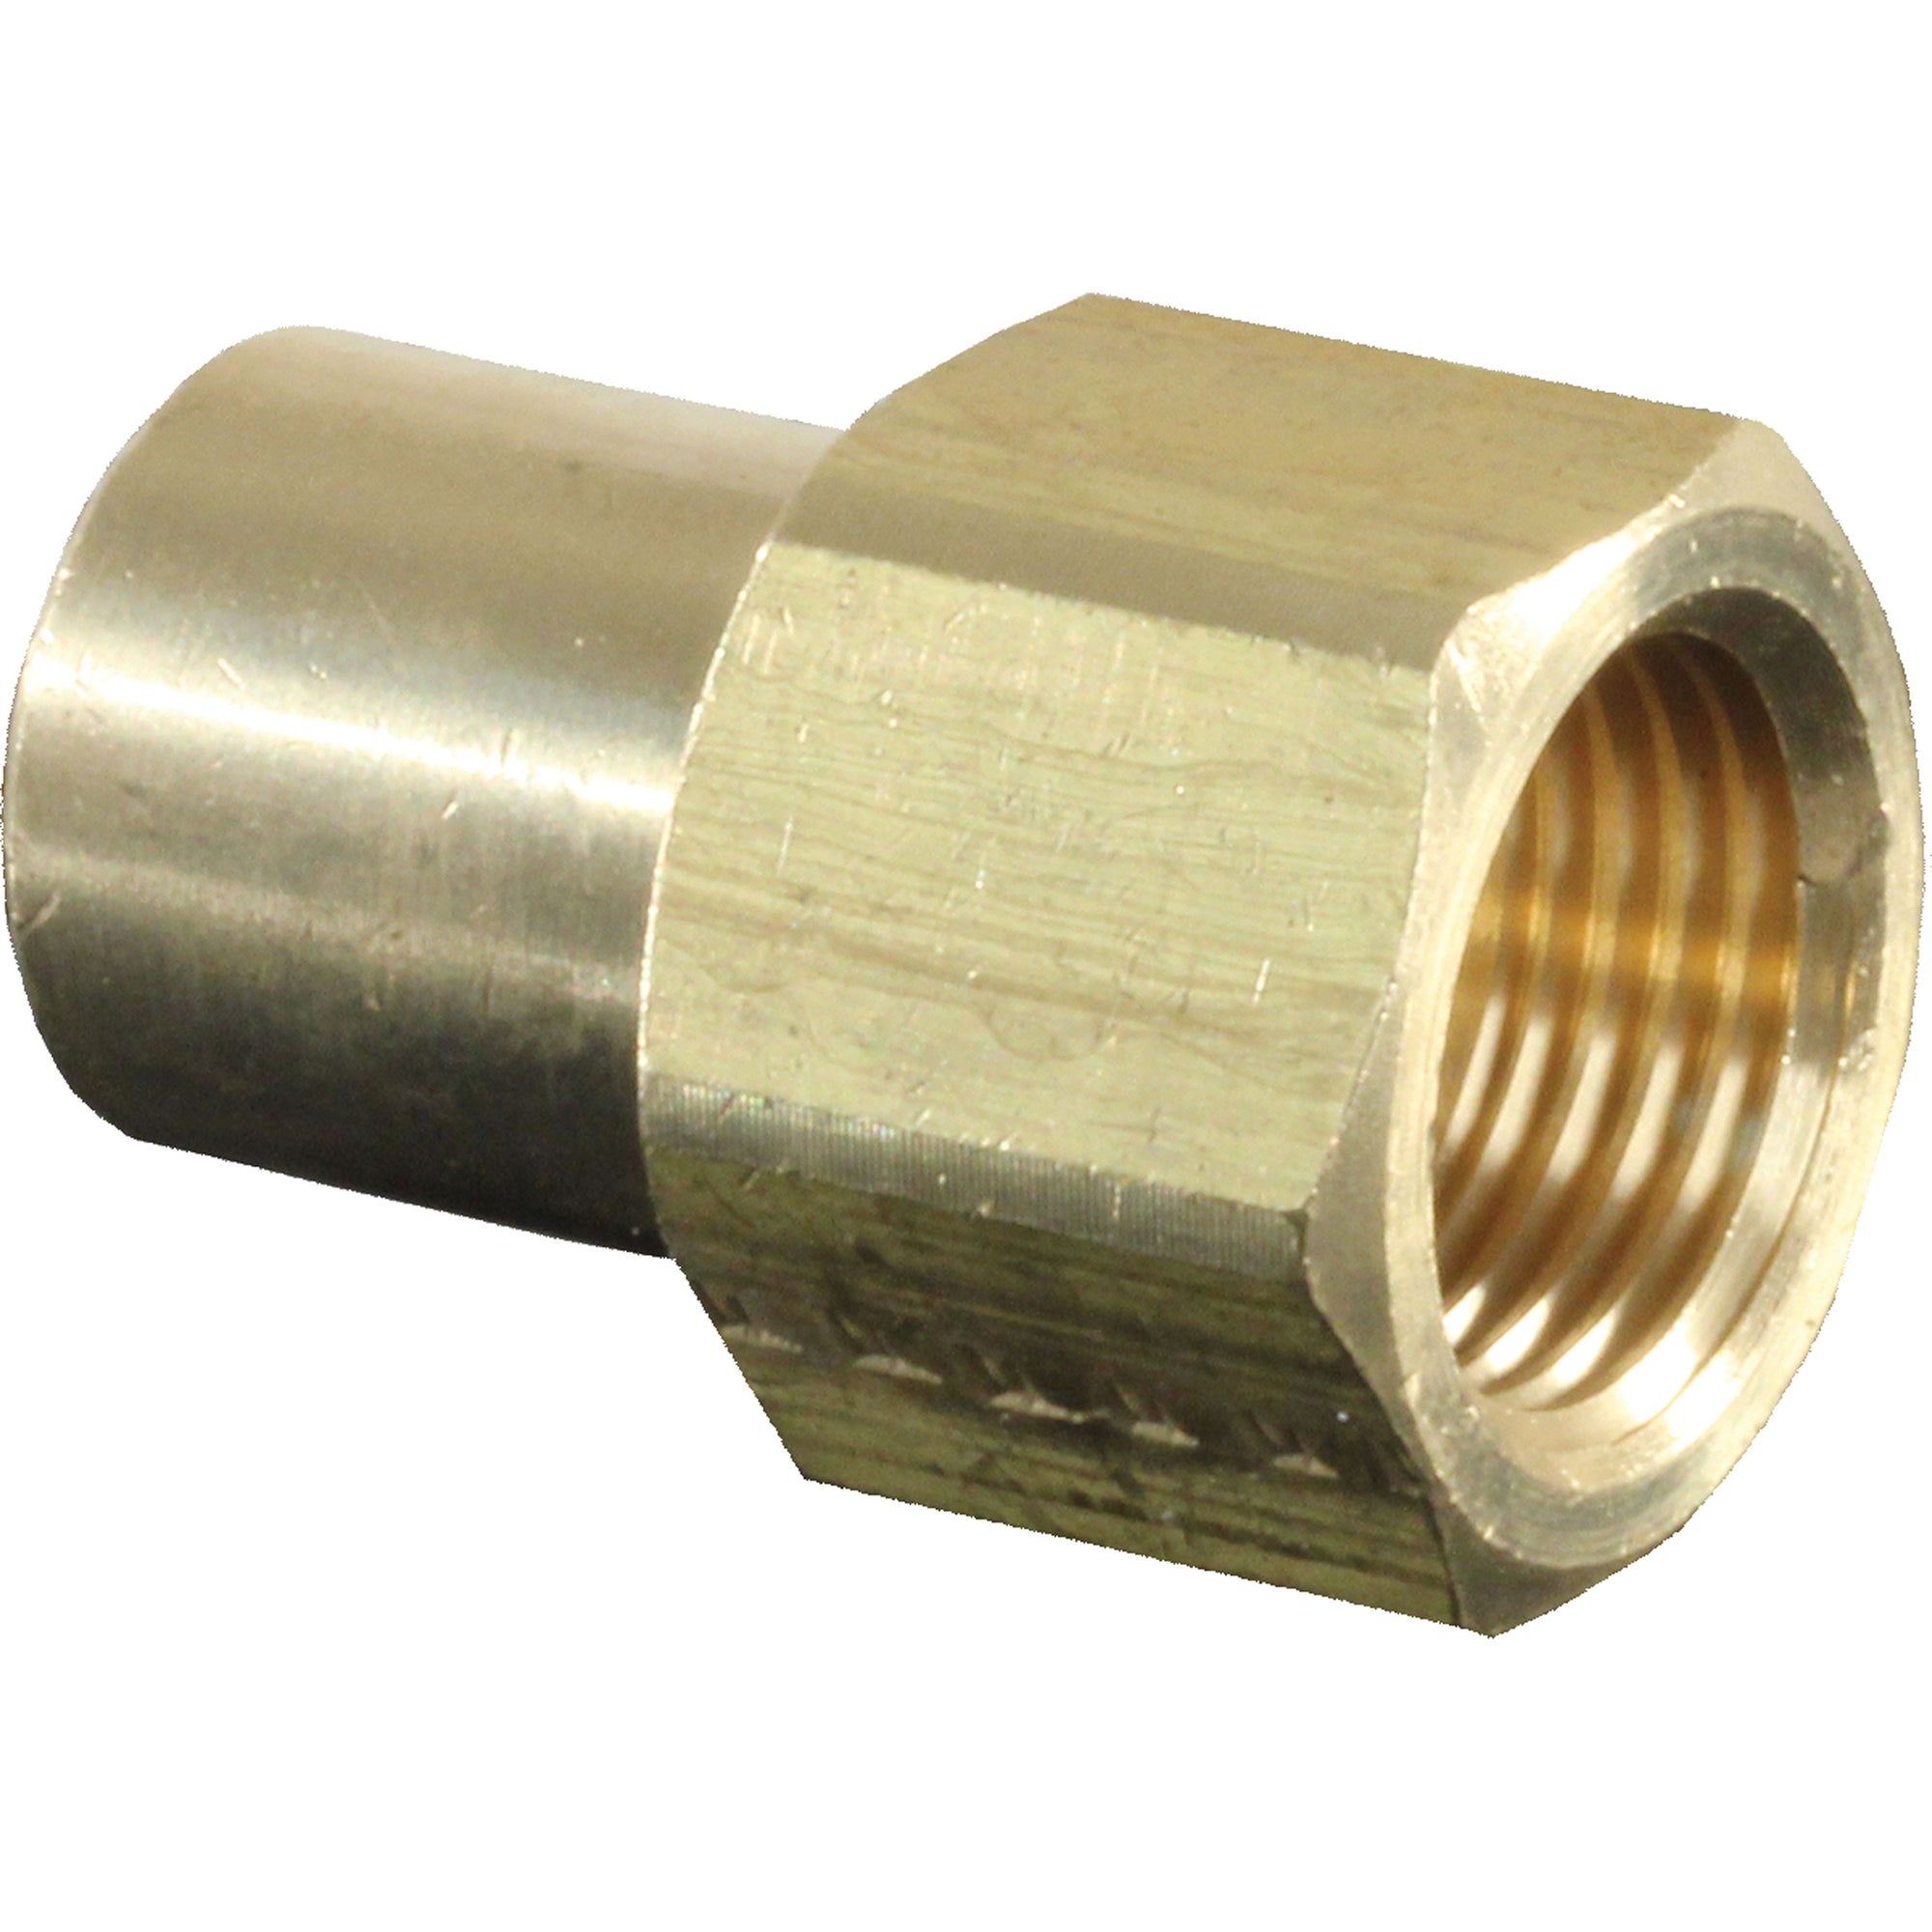 JR Products 07-30225 3/8" Female Flare To 1/4" FPT Connector